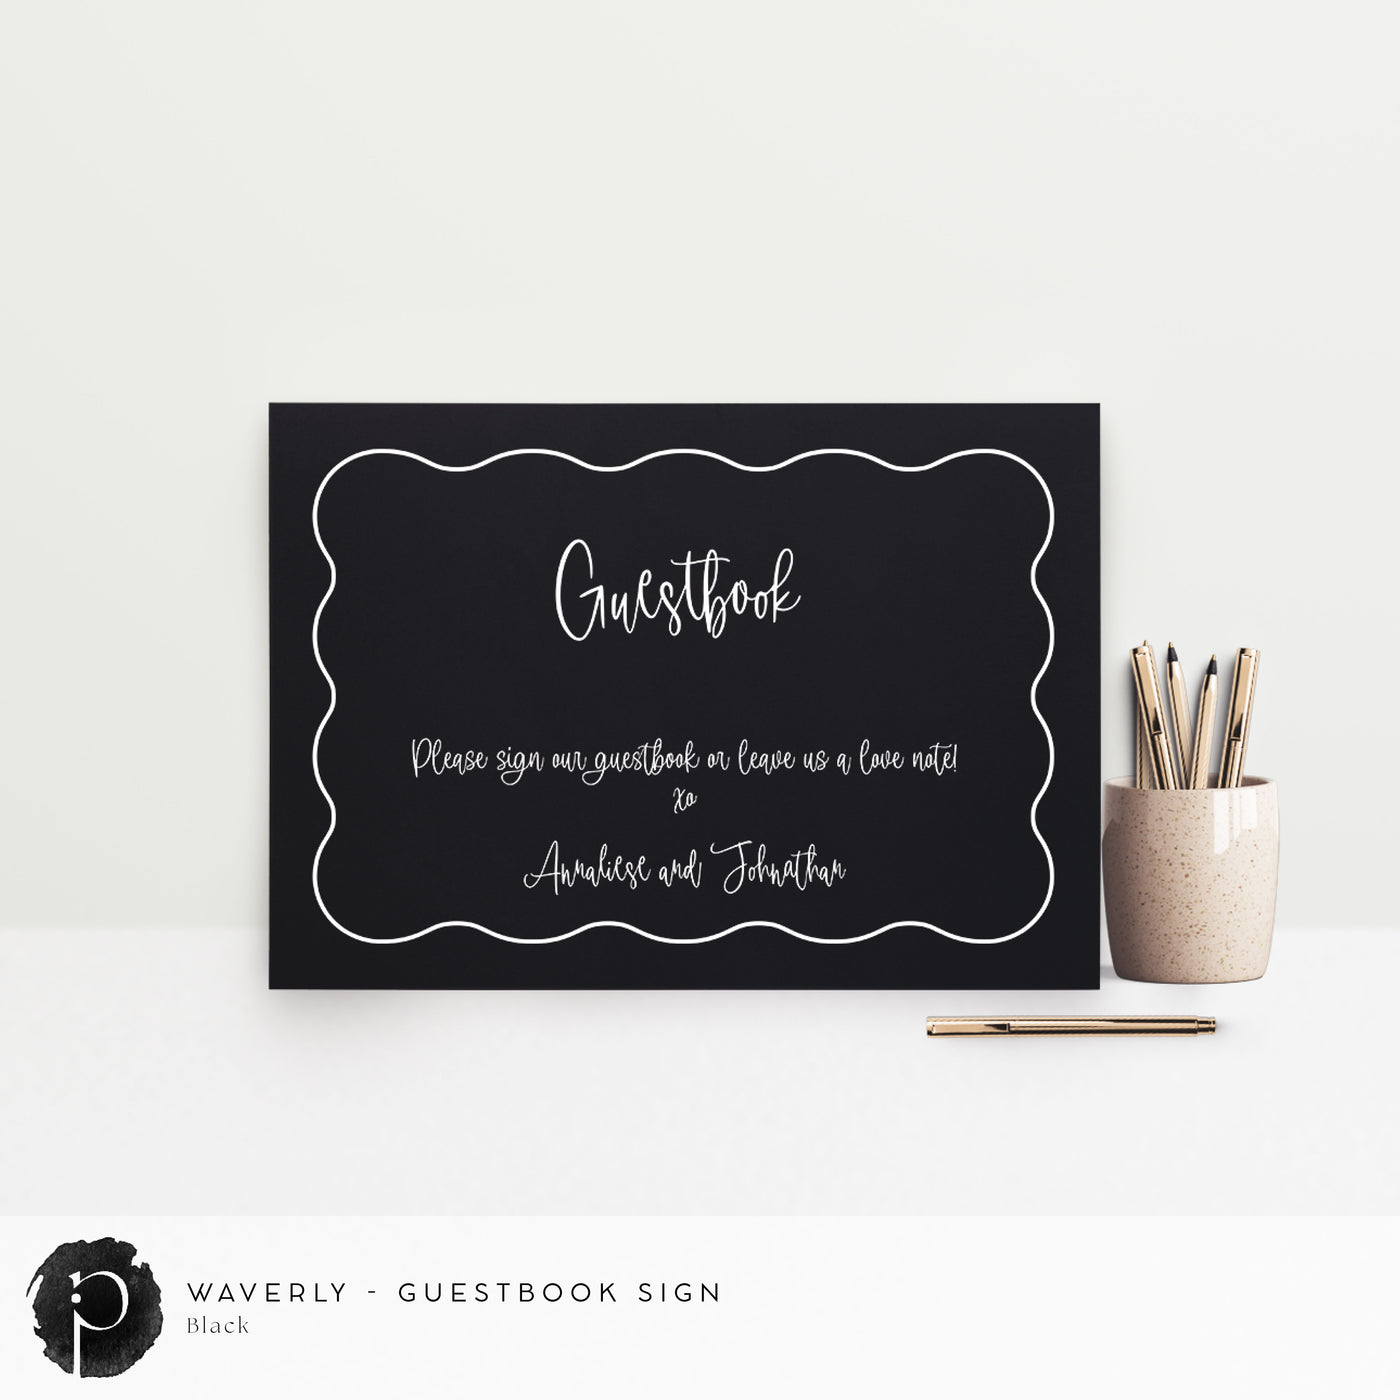 Waverly - Guestbook Sign